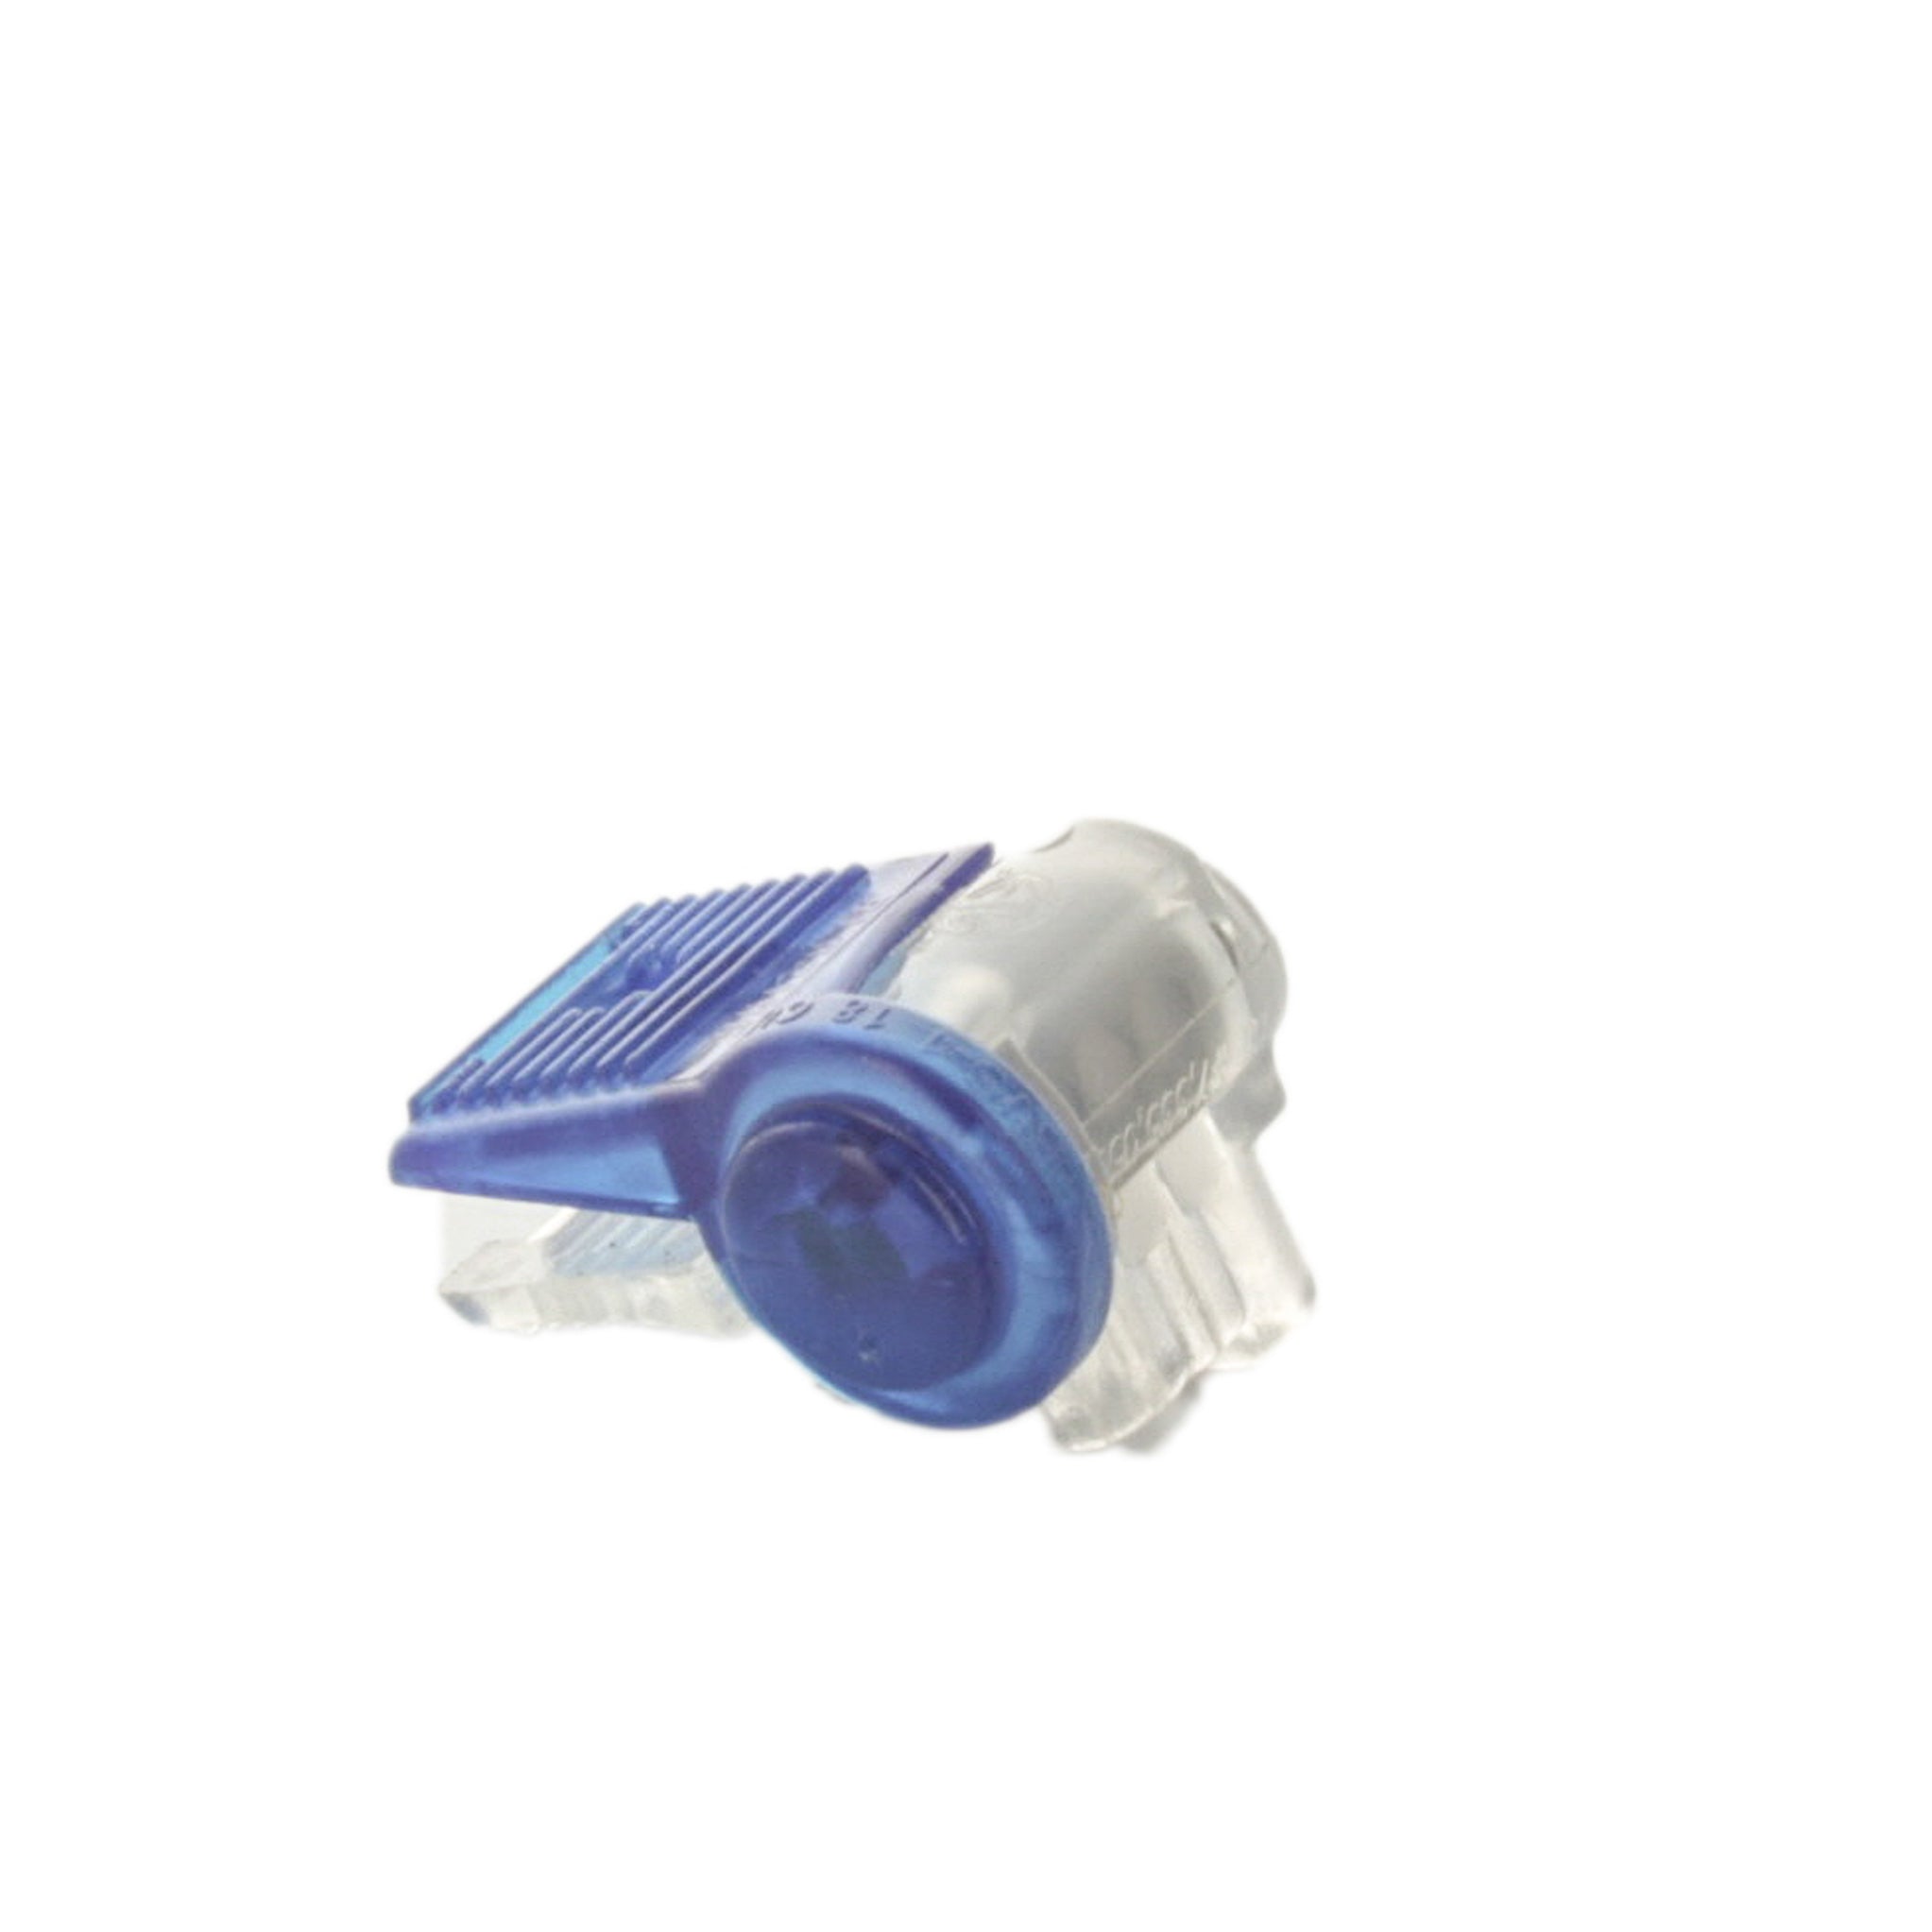 Blazing - BVS-1 - Blue And Clear Waterproof Wire Connector